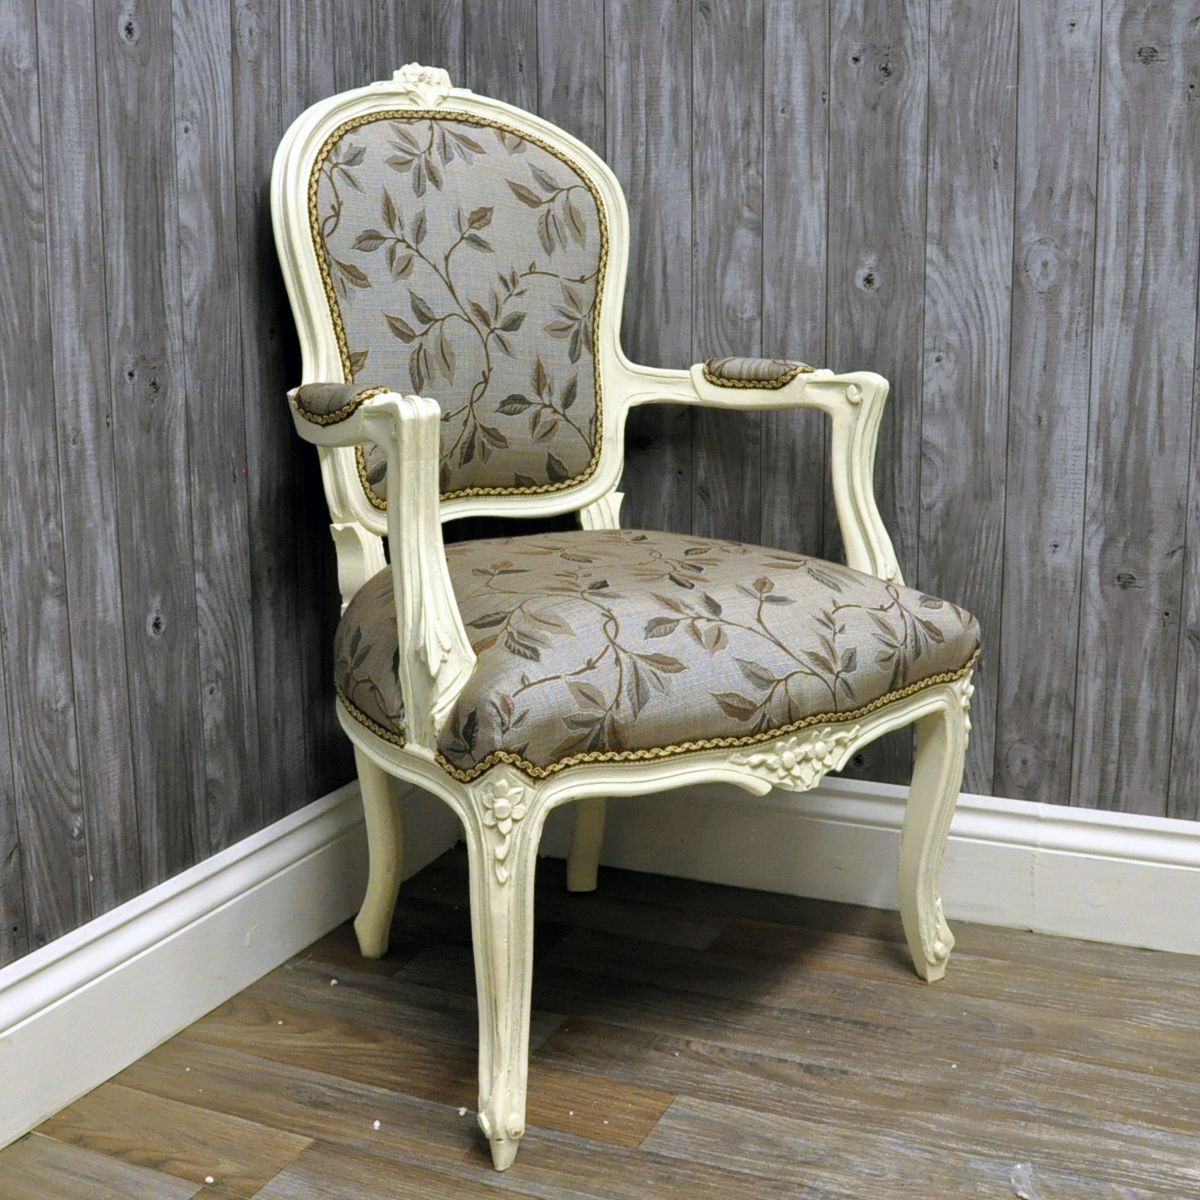 Antique Cream Finish French Style Louis Arm Chair With Grey Leaf Fabric Intended For Gray And Natural Banana Leaf Accent Stools (View 6 of 20)